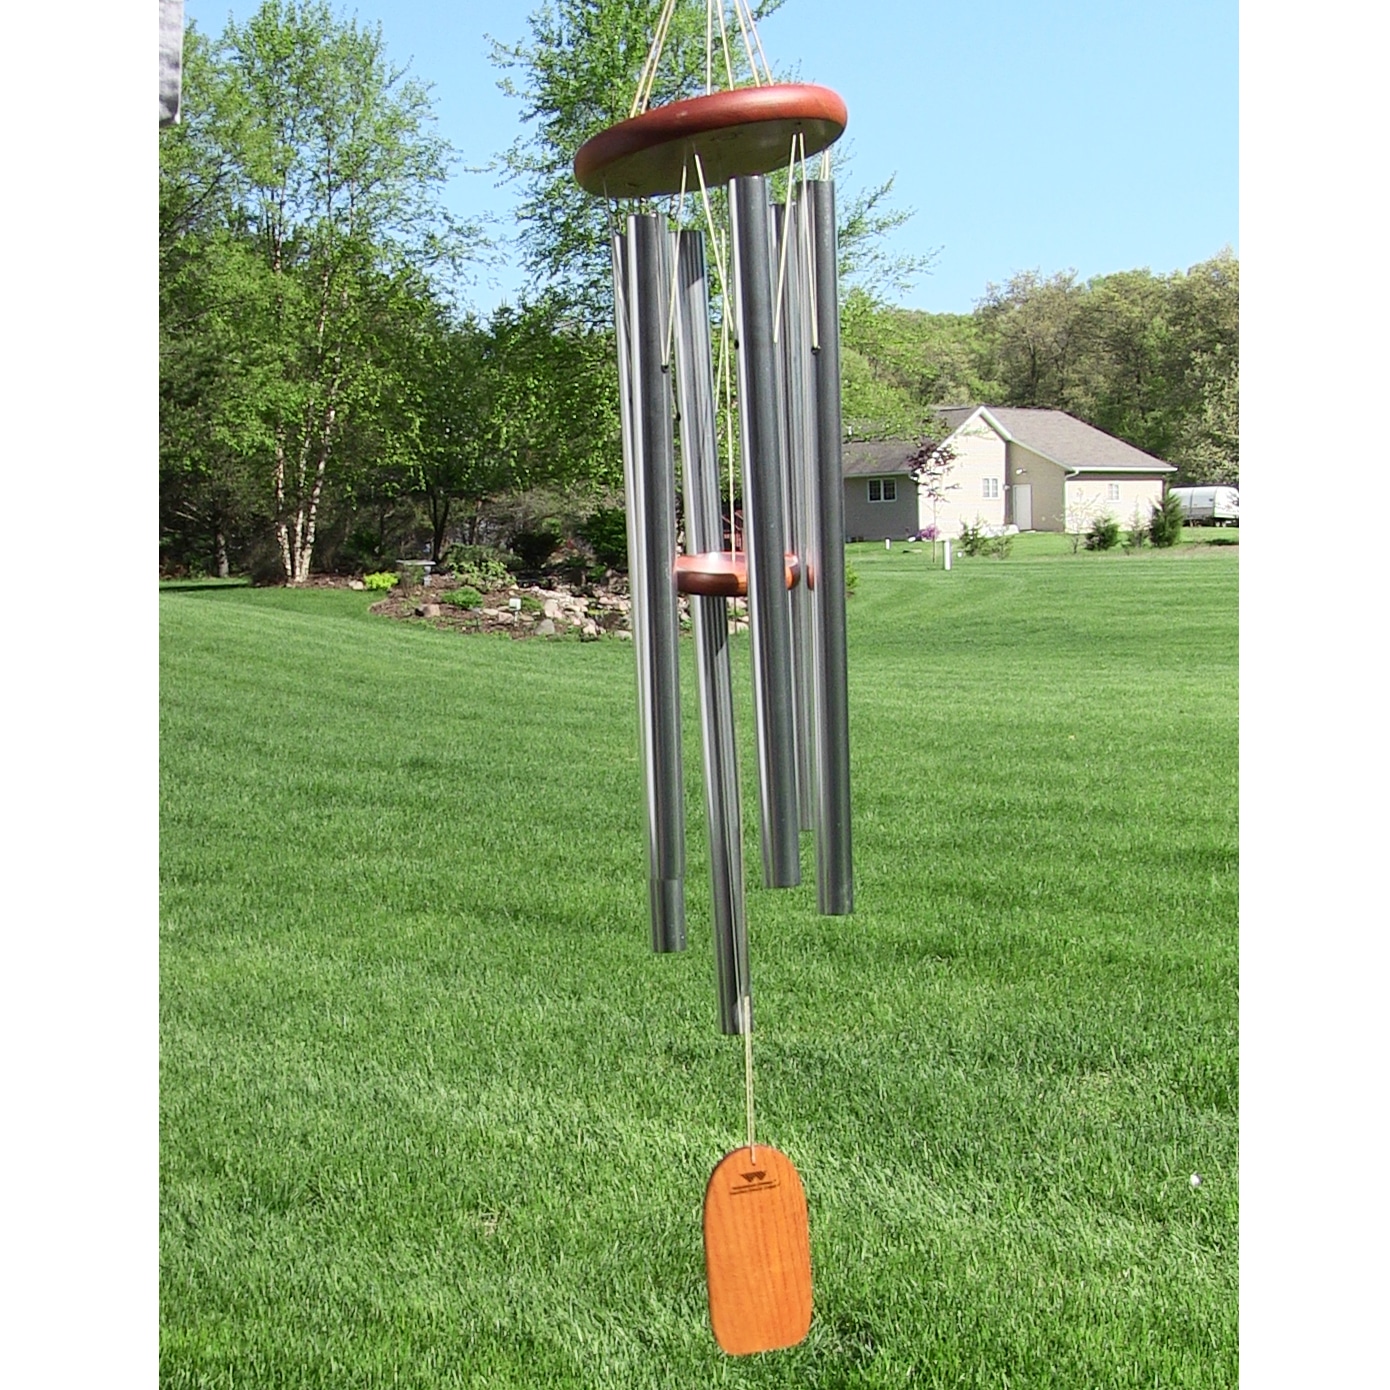 Woodstock Amazing Grace with the Best Wind chimes sounds